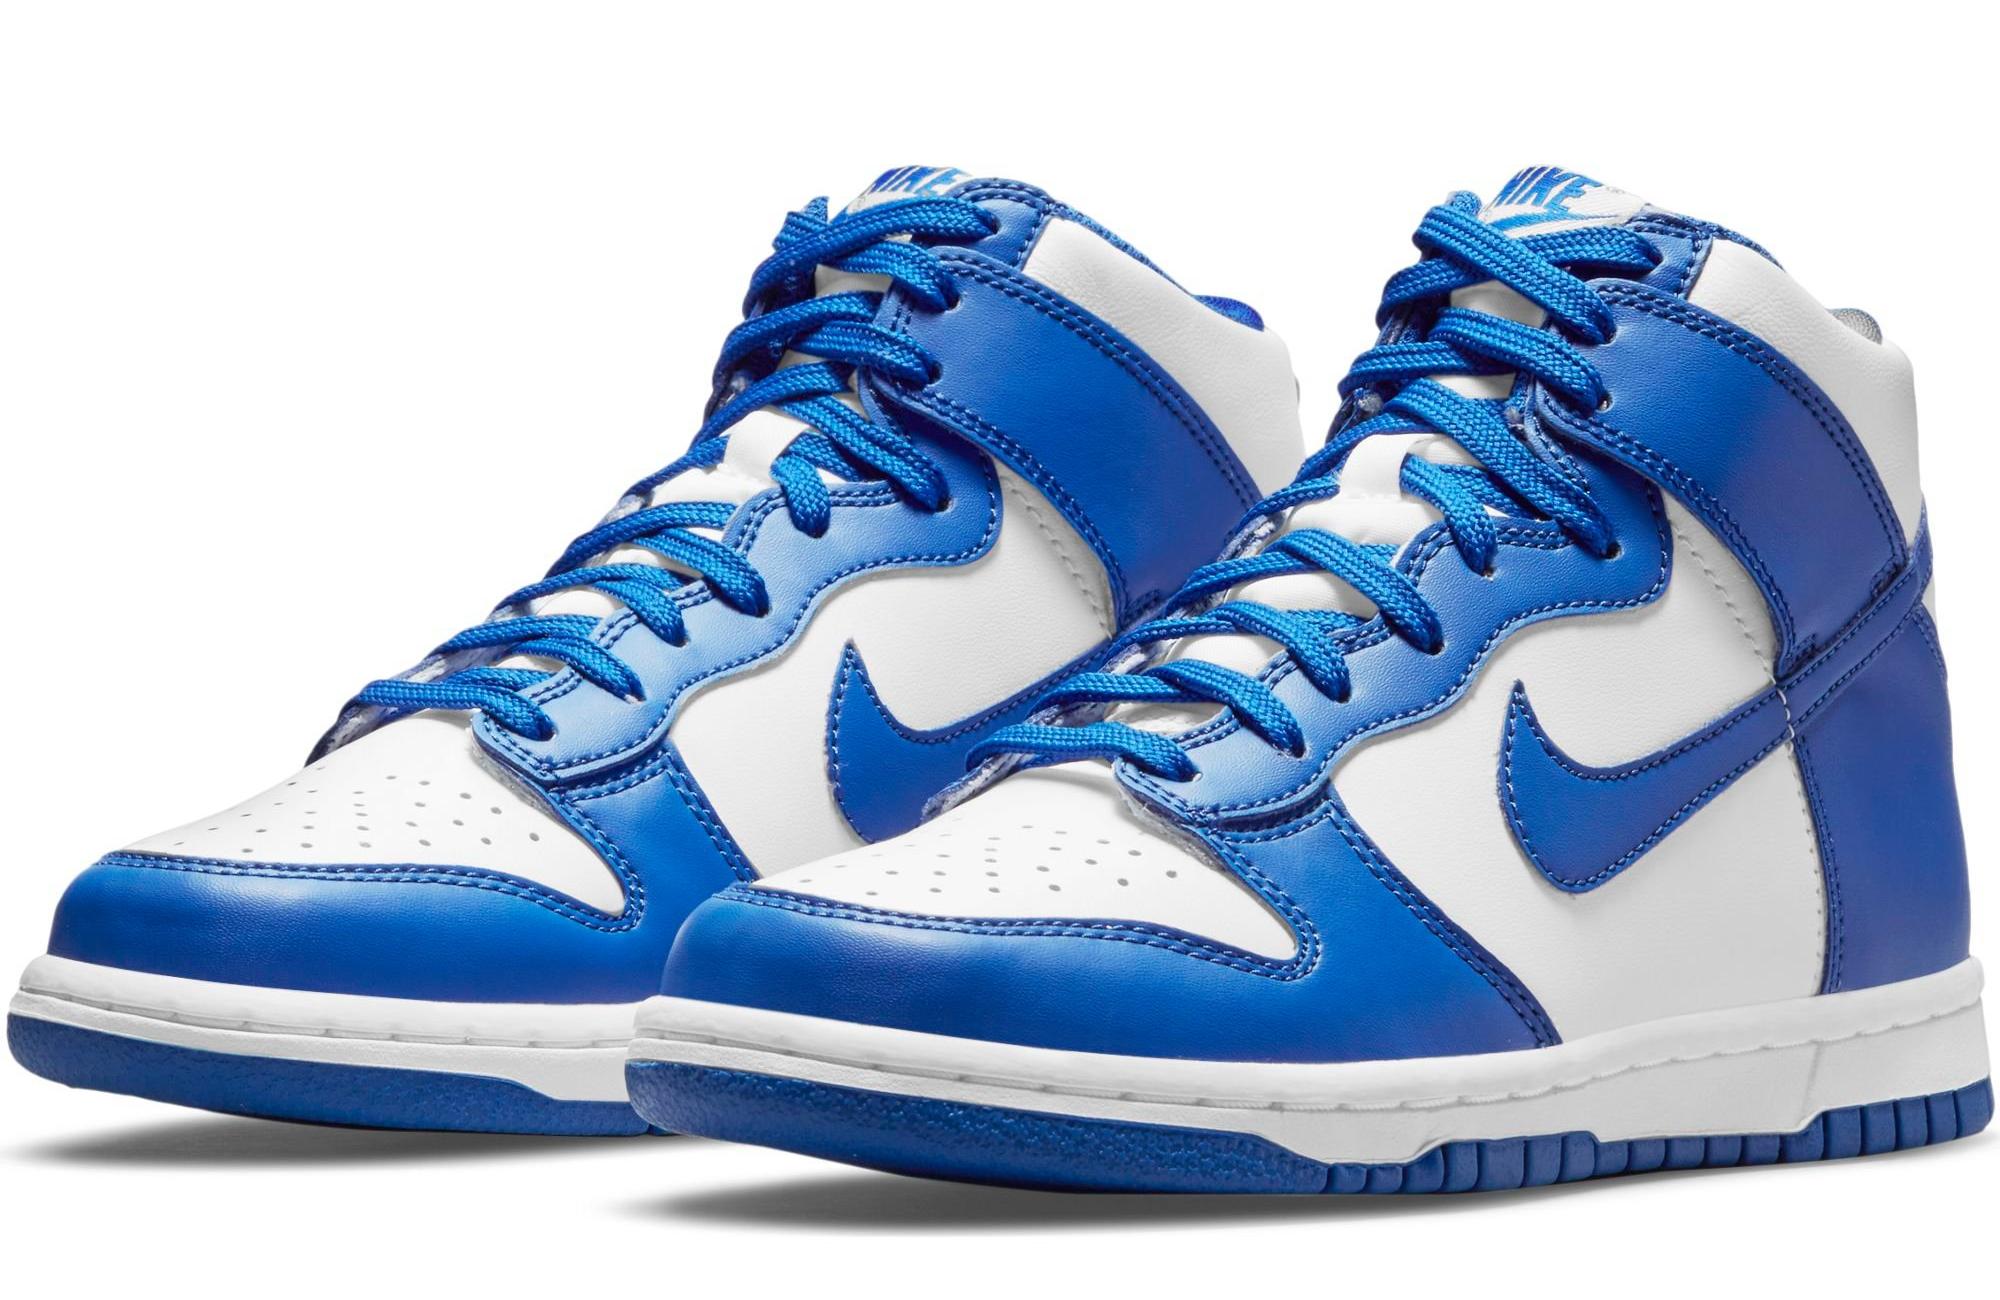 Sneakers Release – “Game Royal” Nike Dunk High 